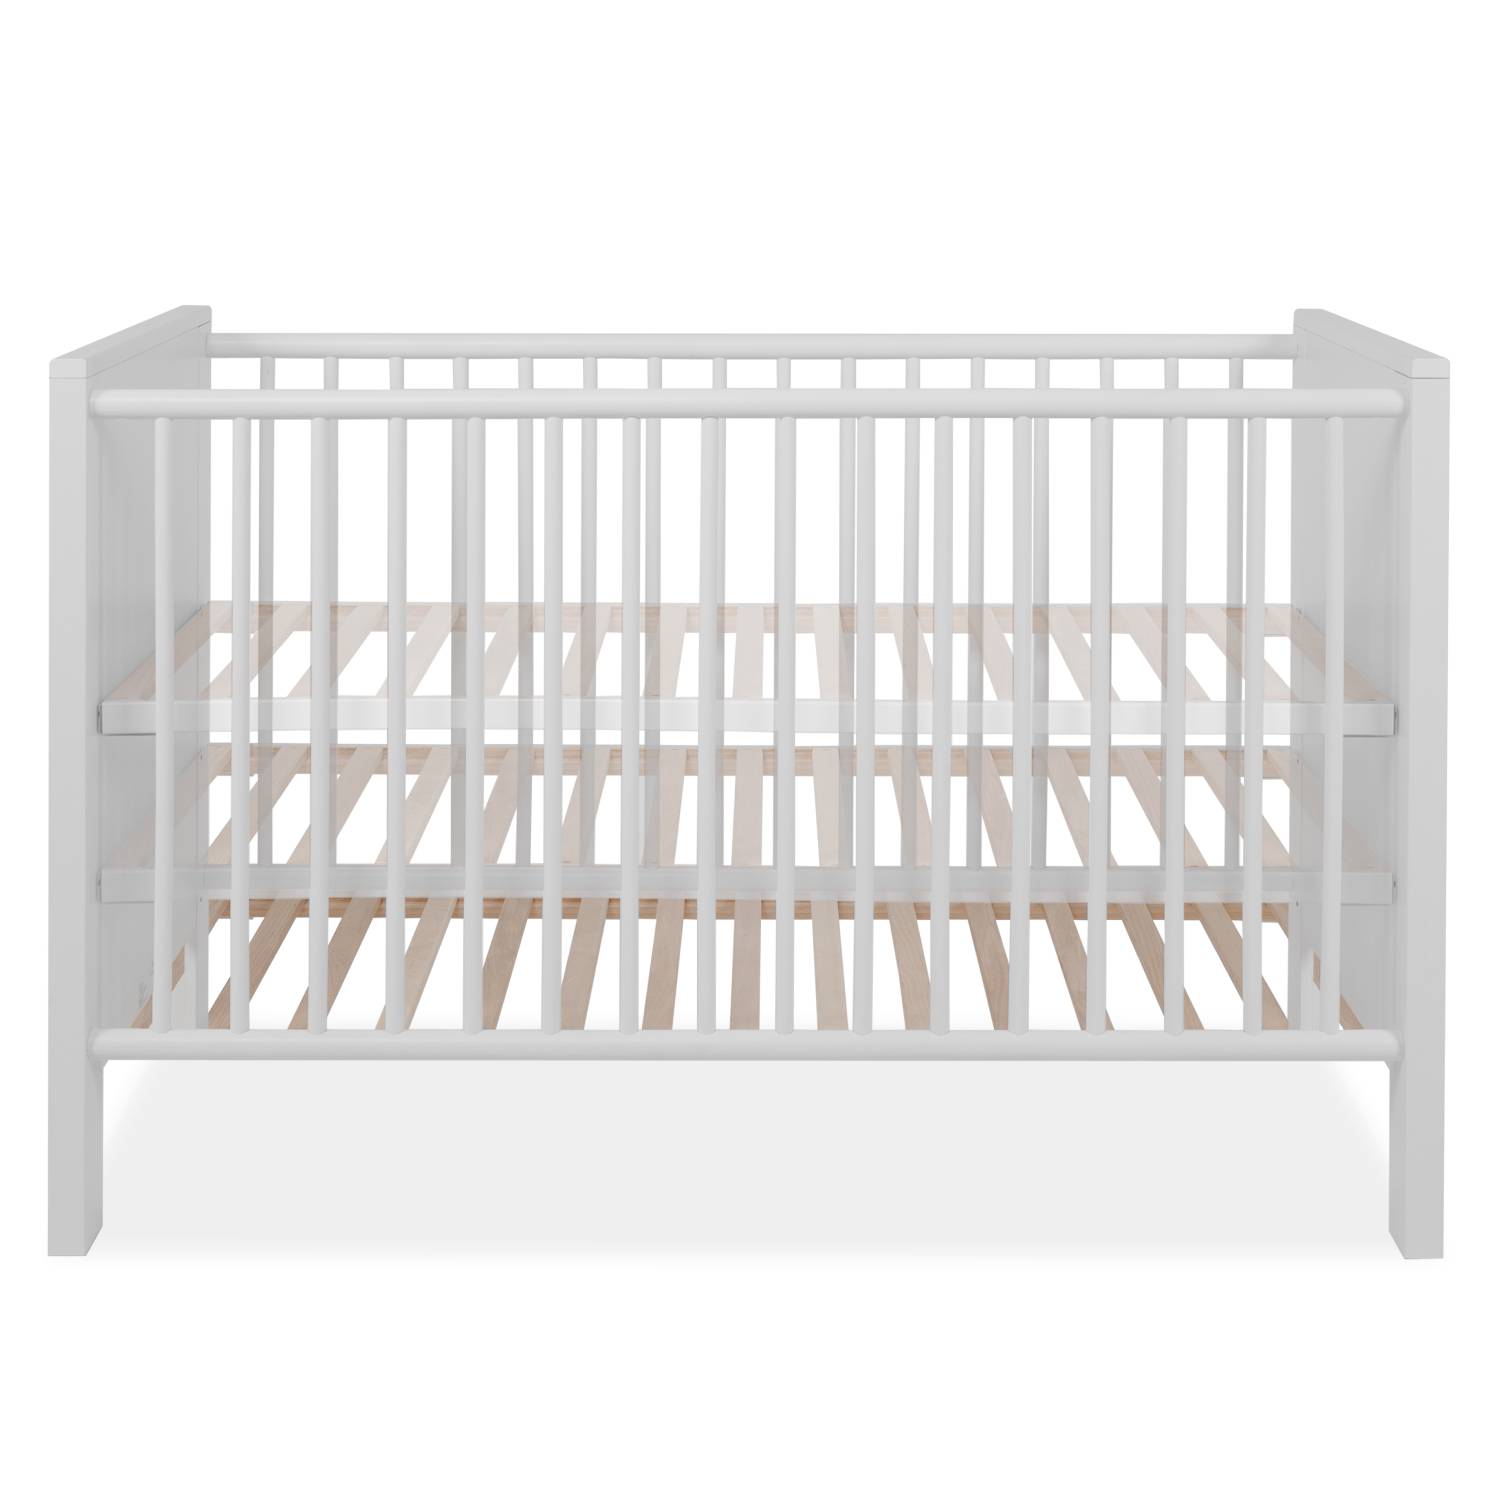 Baby Bed Cot Wooden Bed 70x140 cm Infant Bed Childrens Bed Nursery